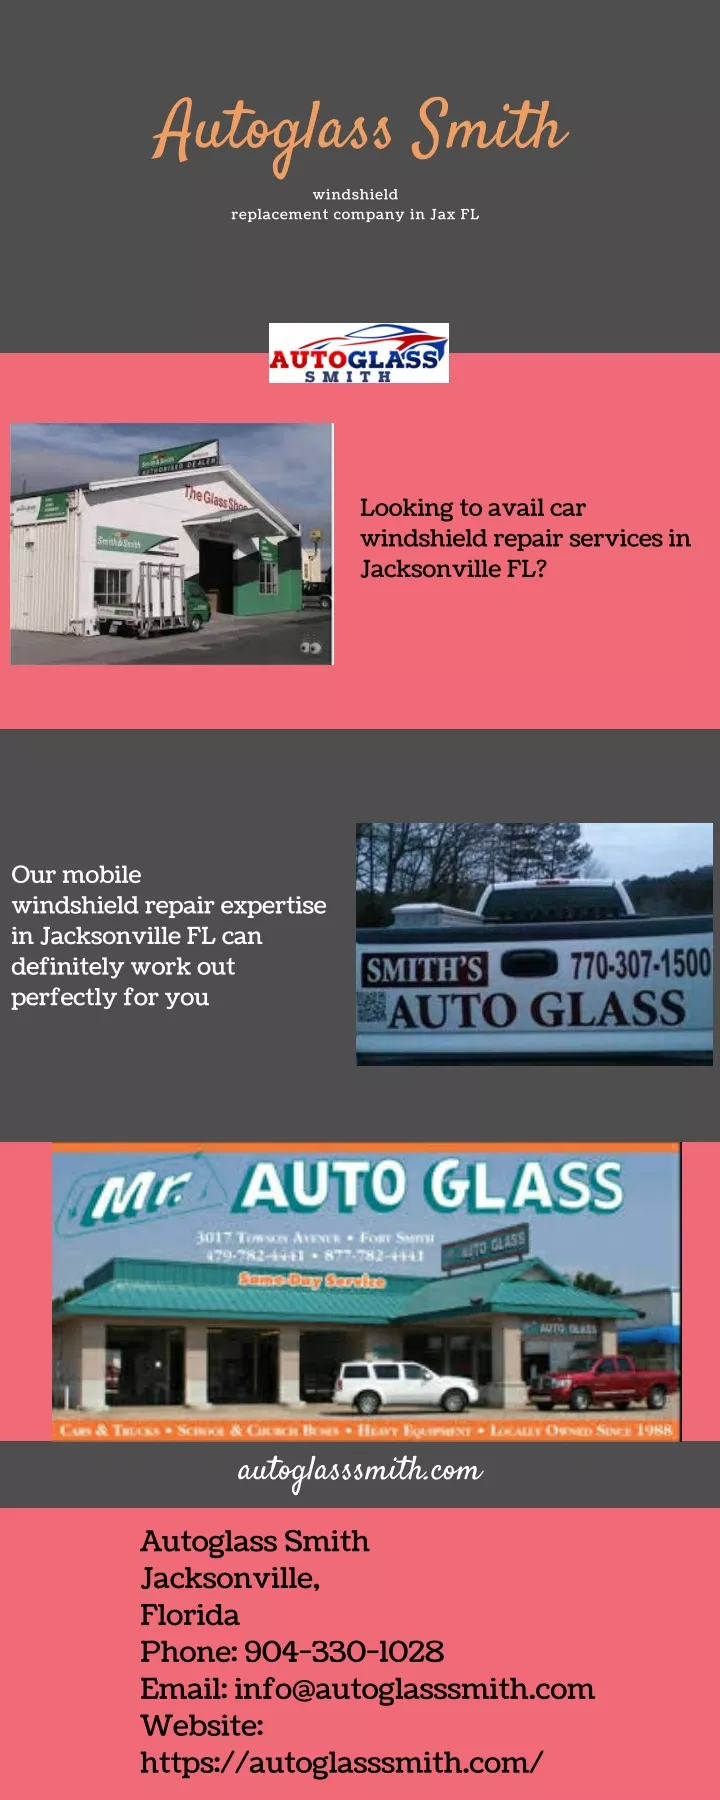 autoglass smith windshield replacement company n.